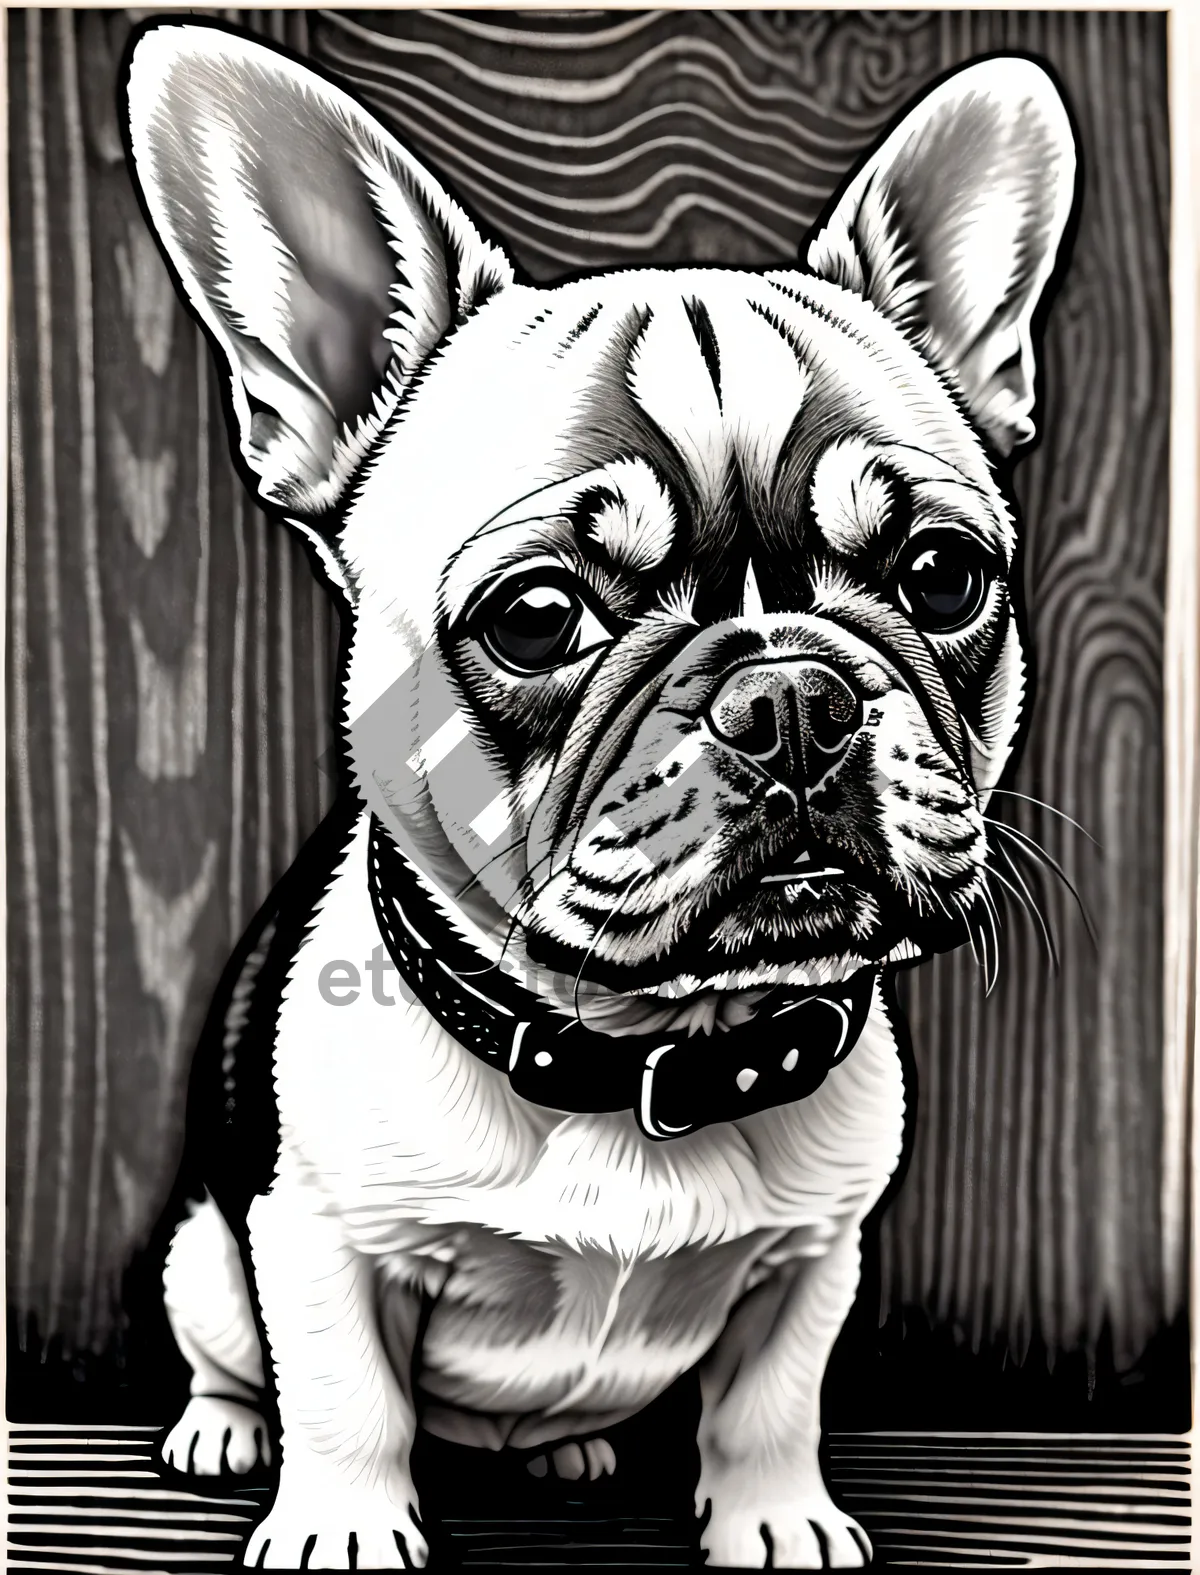 Picture of Playful Bulldog Terrier: Adorable Canine Portrait